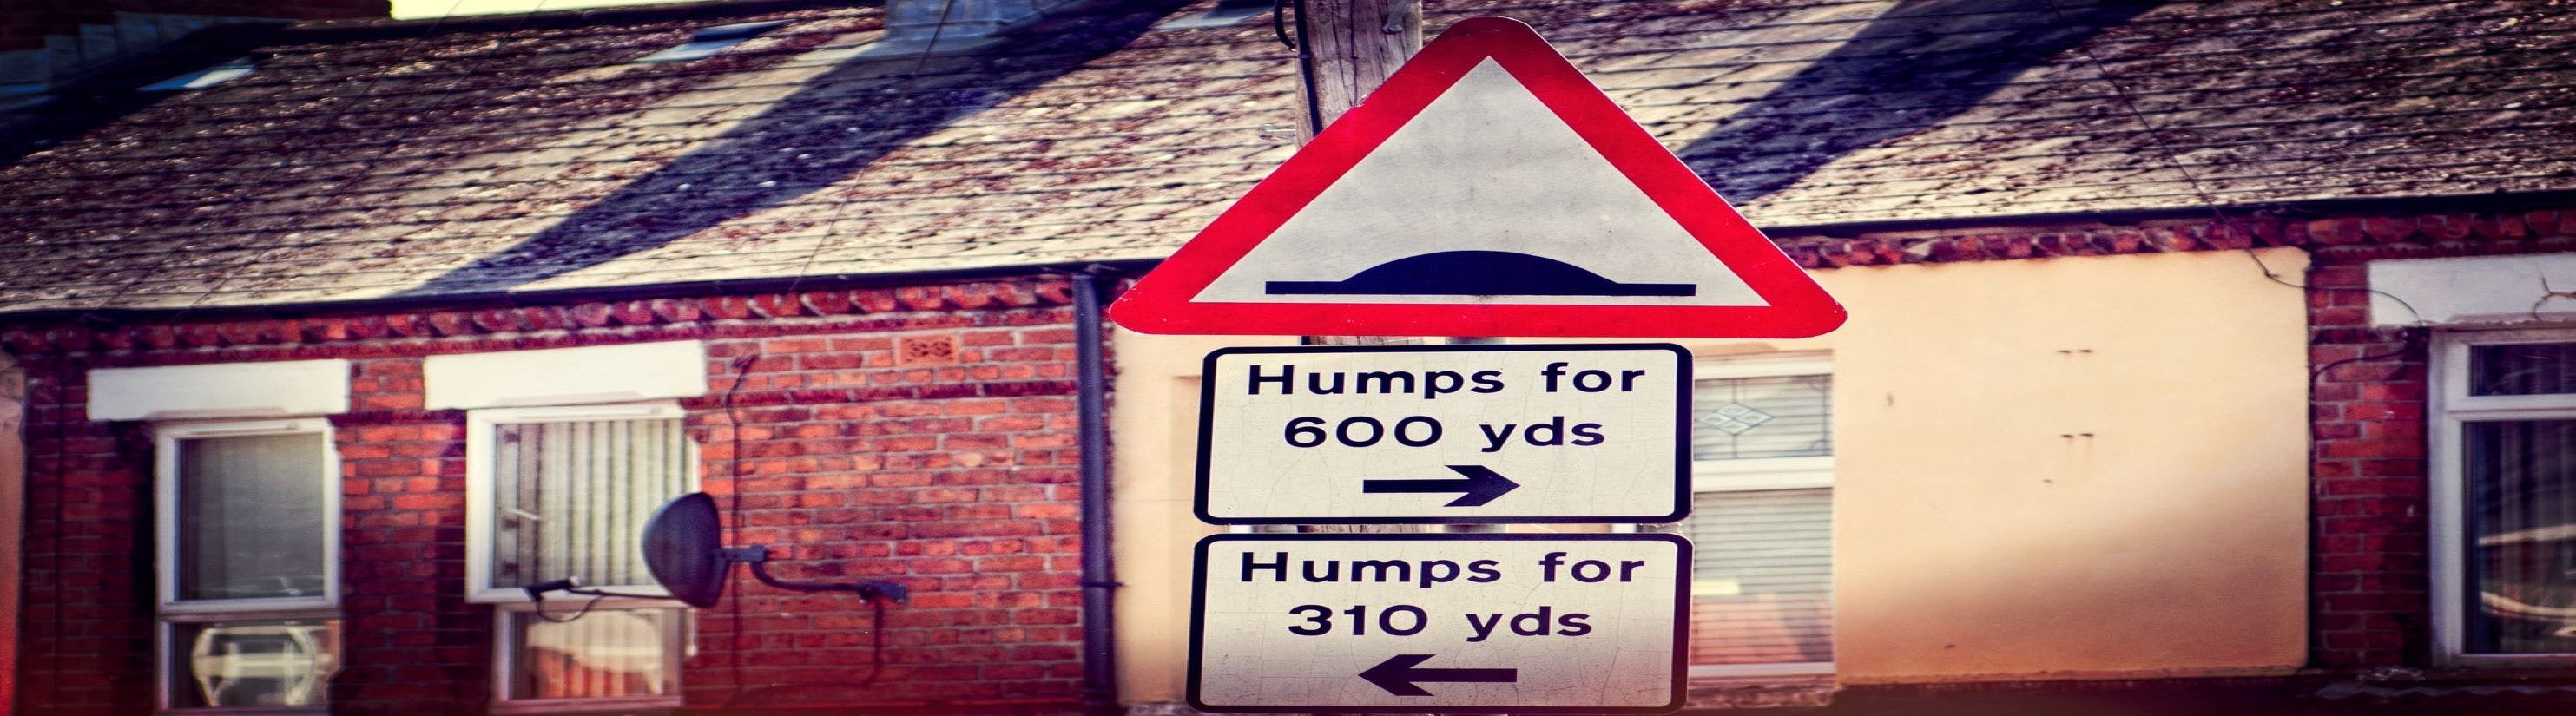 Photo of traffic calming (Humps) road sign.